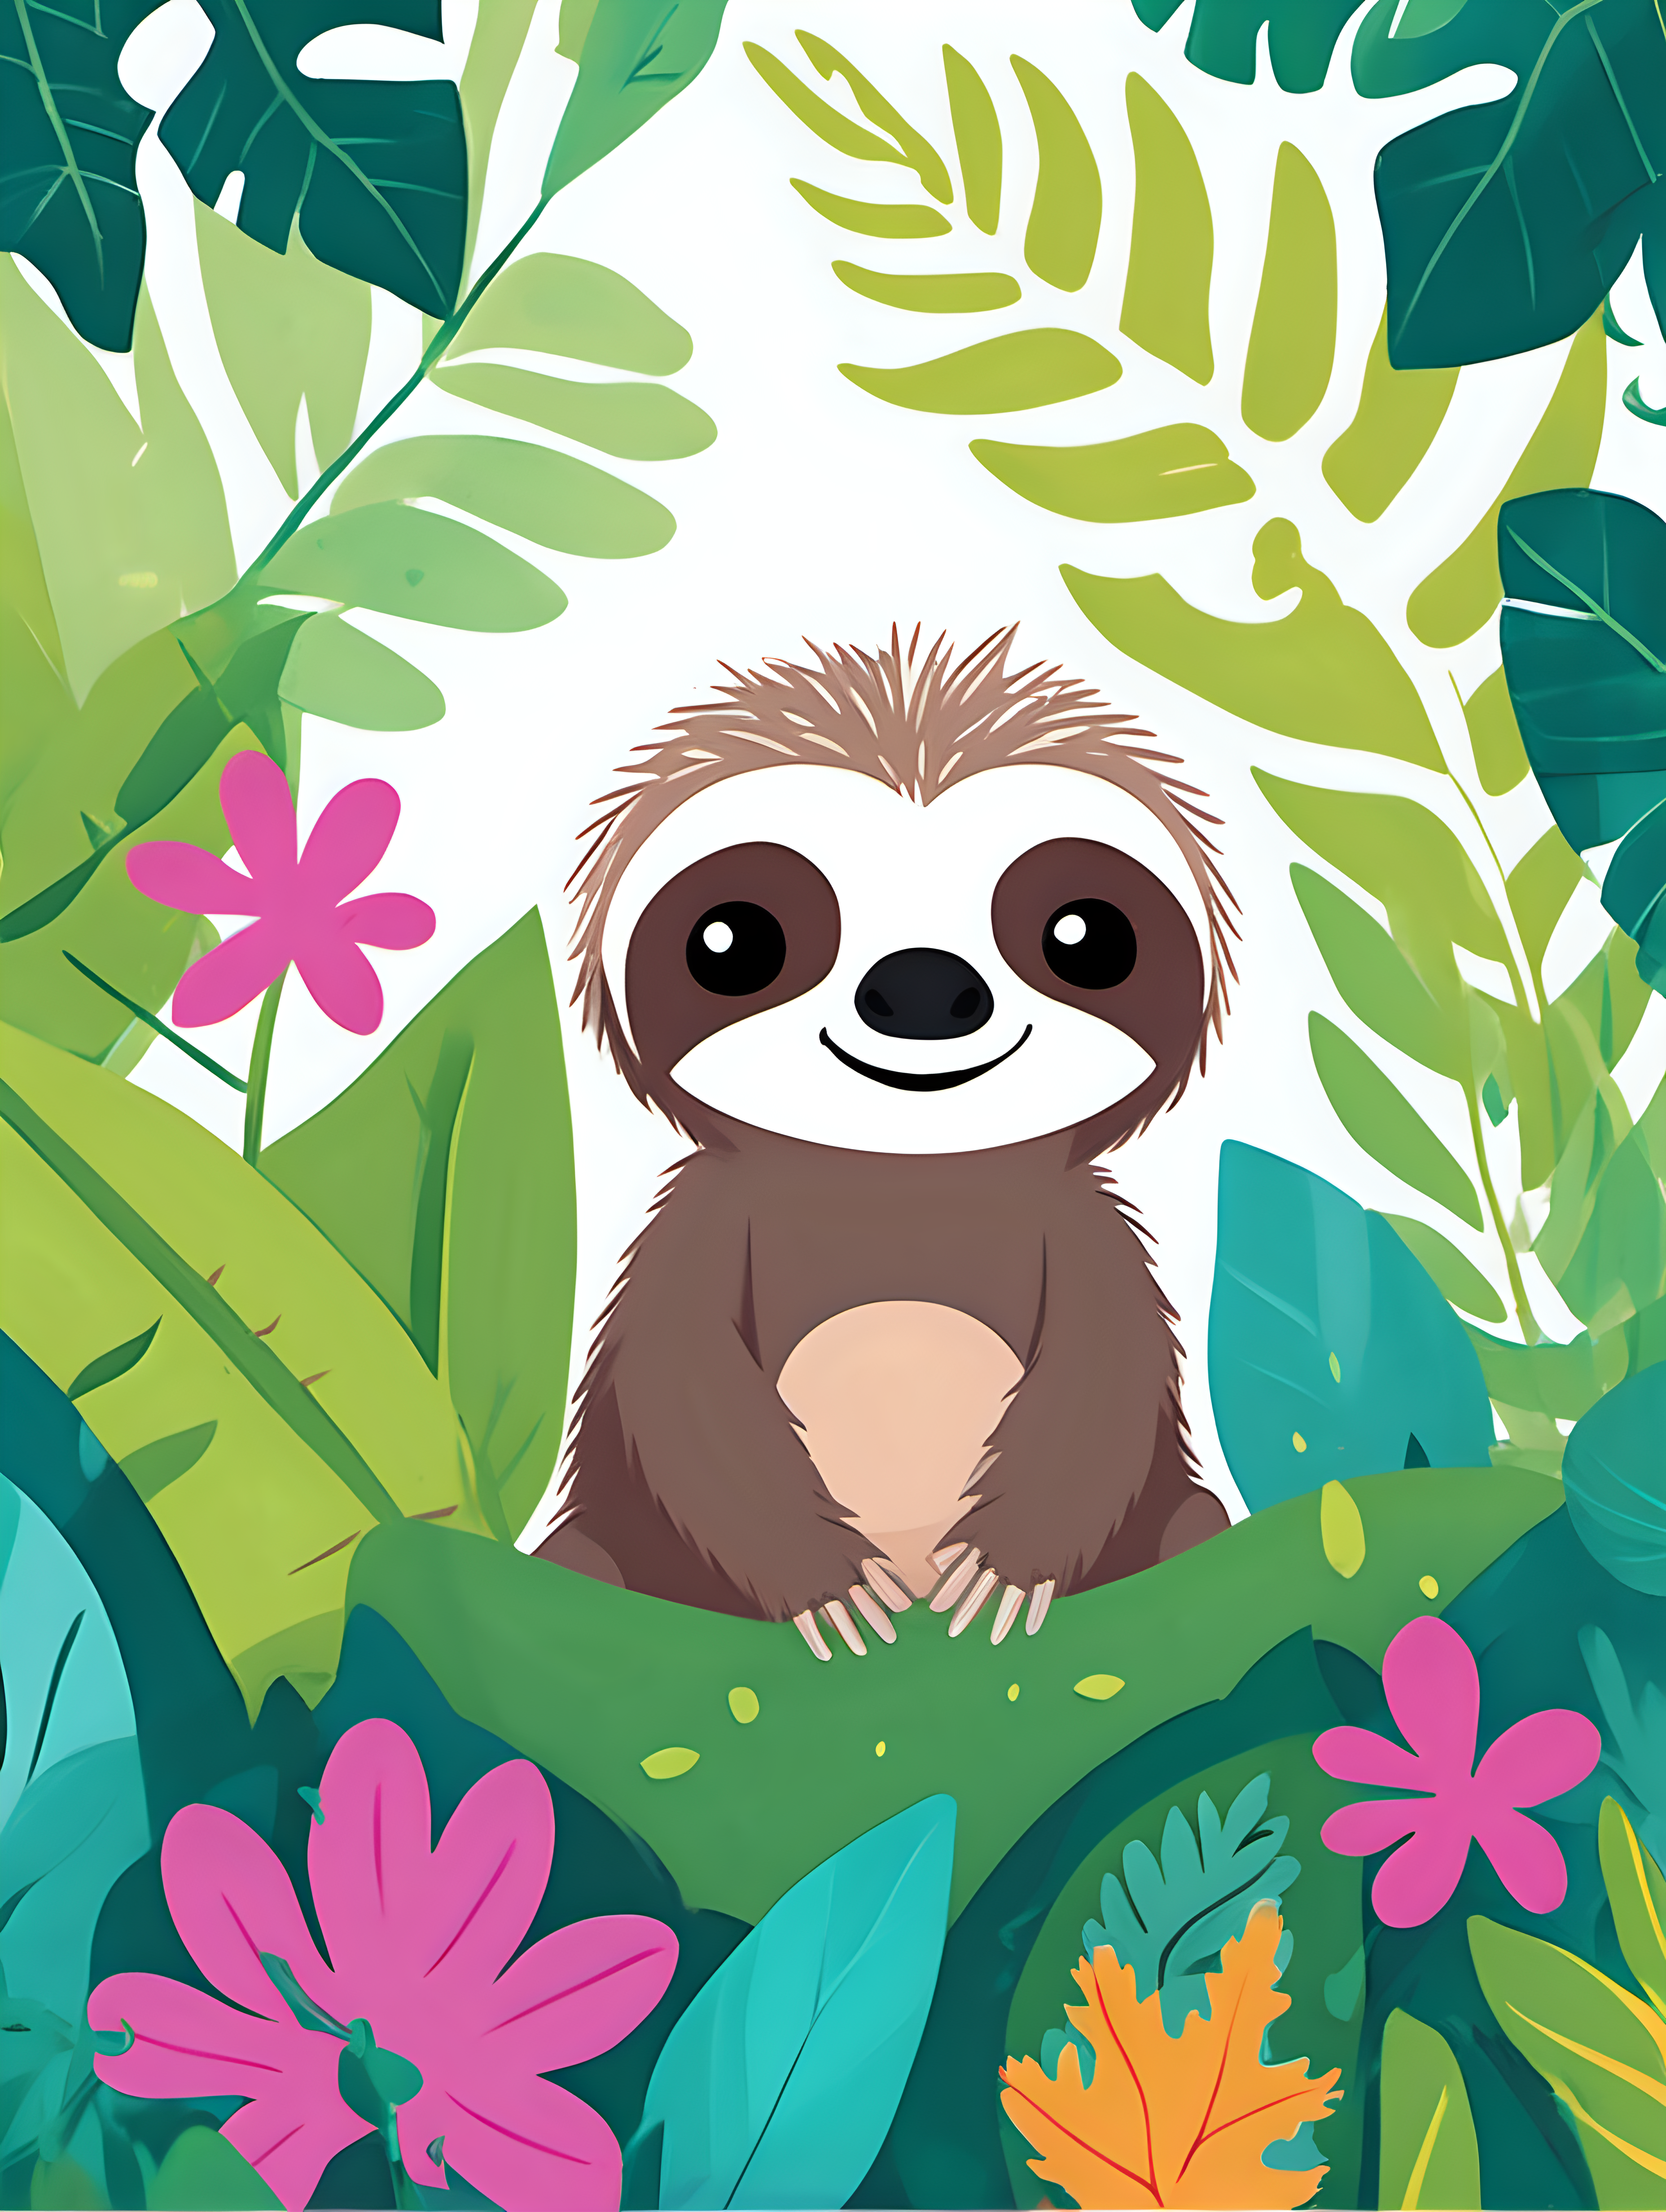 Generate a vibrant book cover featuring a cute sloth and an Axolotl. Ensure both characters are in full color, and include a background of lush leaves to enhance the natural theme. The cover should be visually appealing and convey the charm of these adorable creatures. Feel free to add any additional elements that enhance the overall appeal of the cover for a children's book.